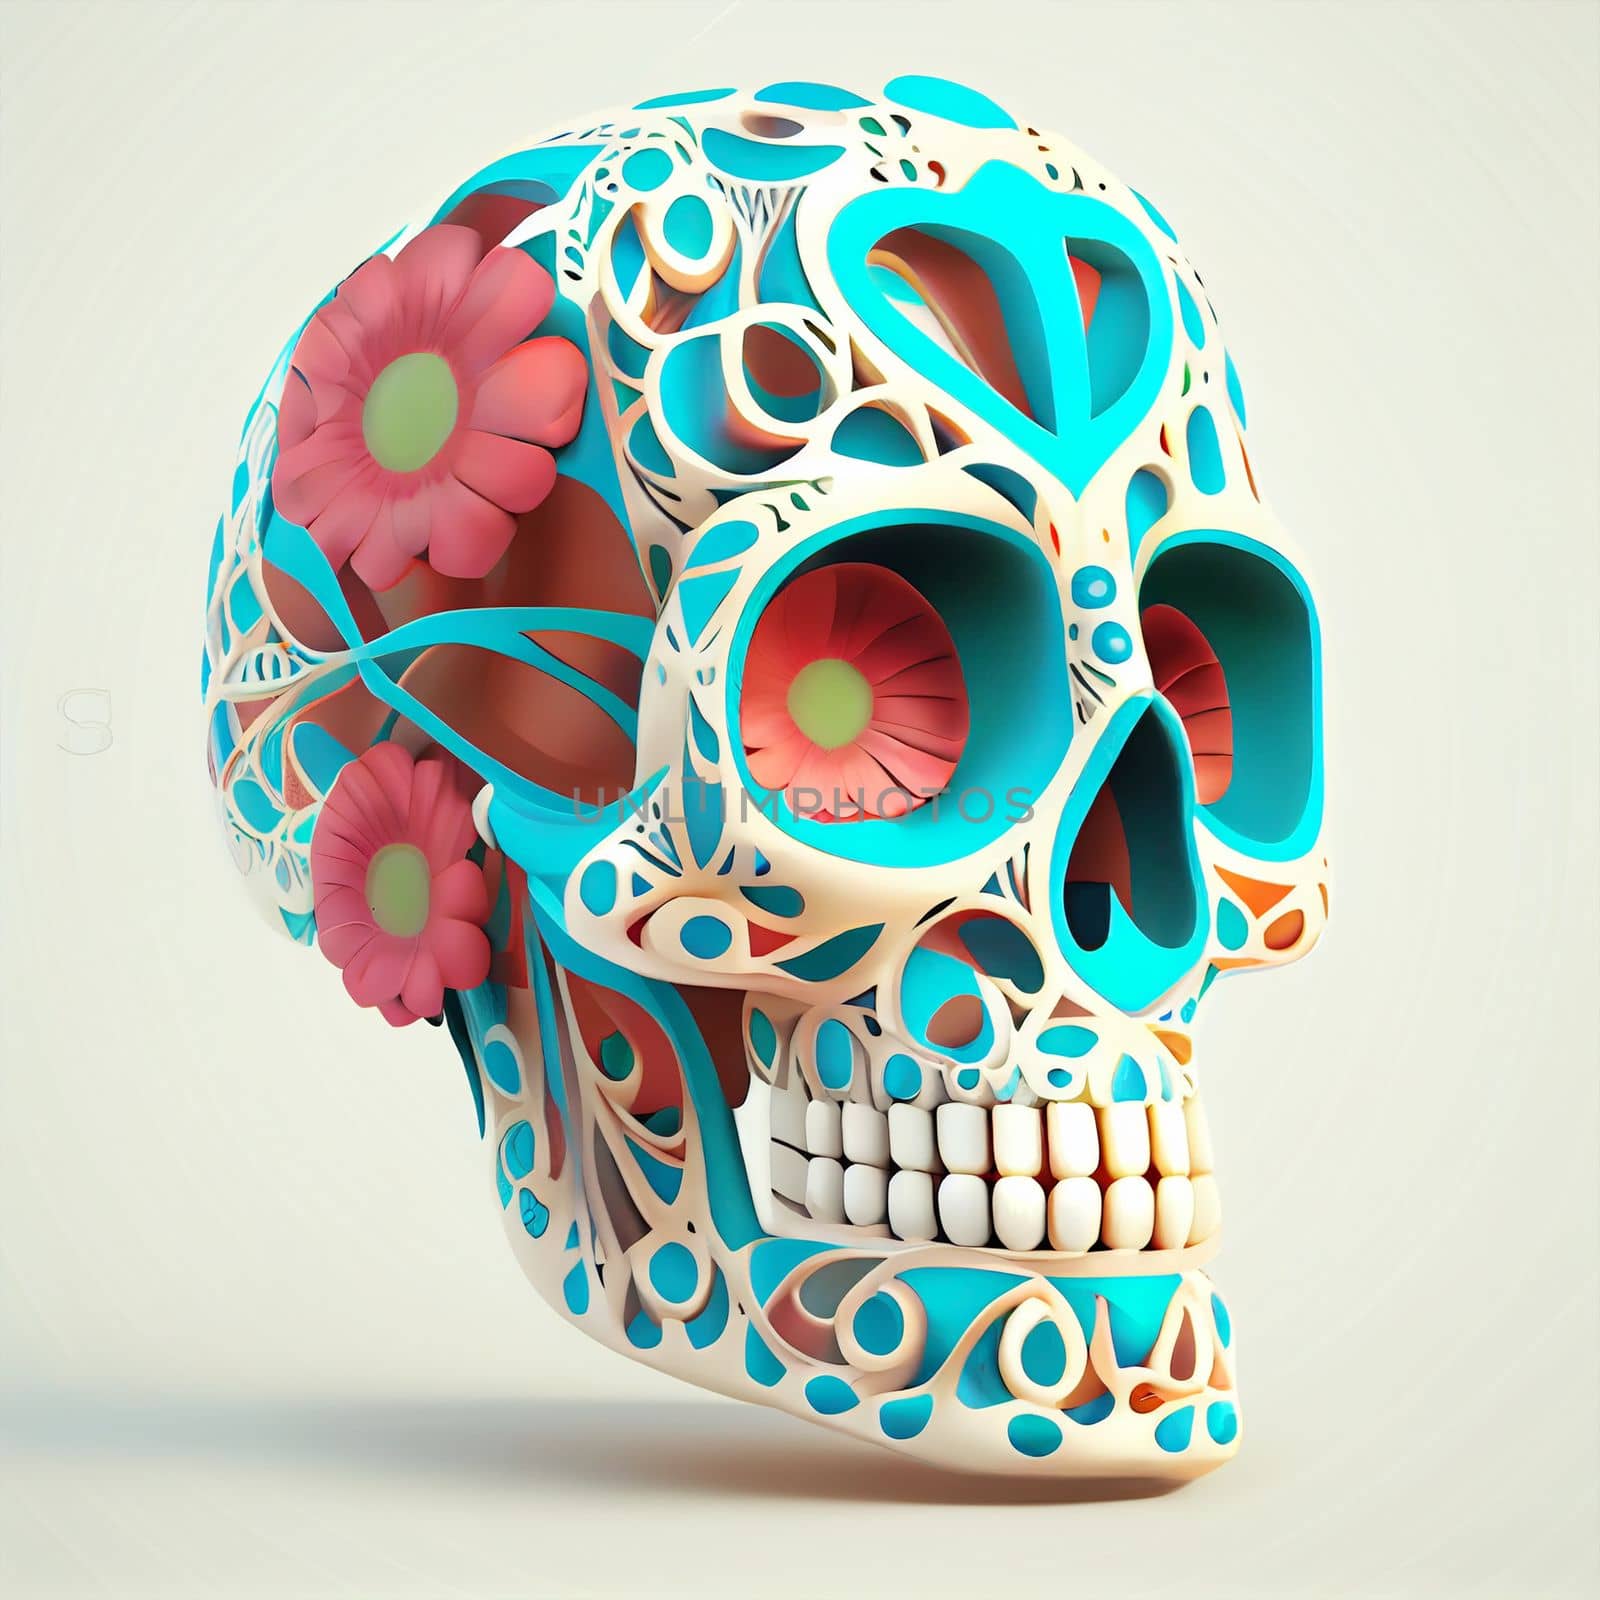 Traditional realistic Calavera, Sugar Skull decorated with flowers. The day of the dead, Dia de los Muertos celebration background. 3D illustration